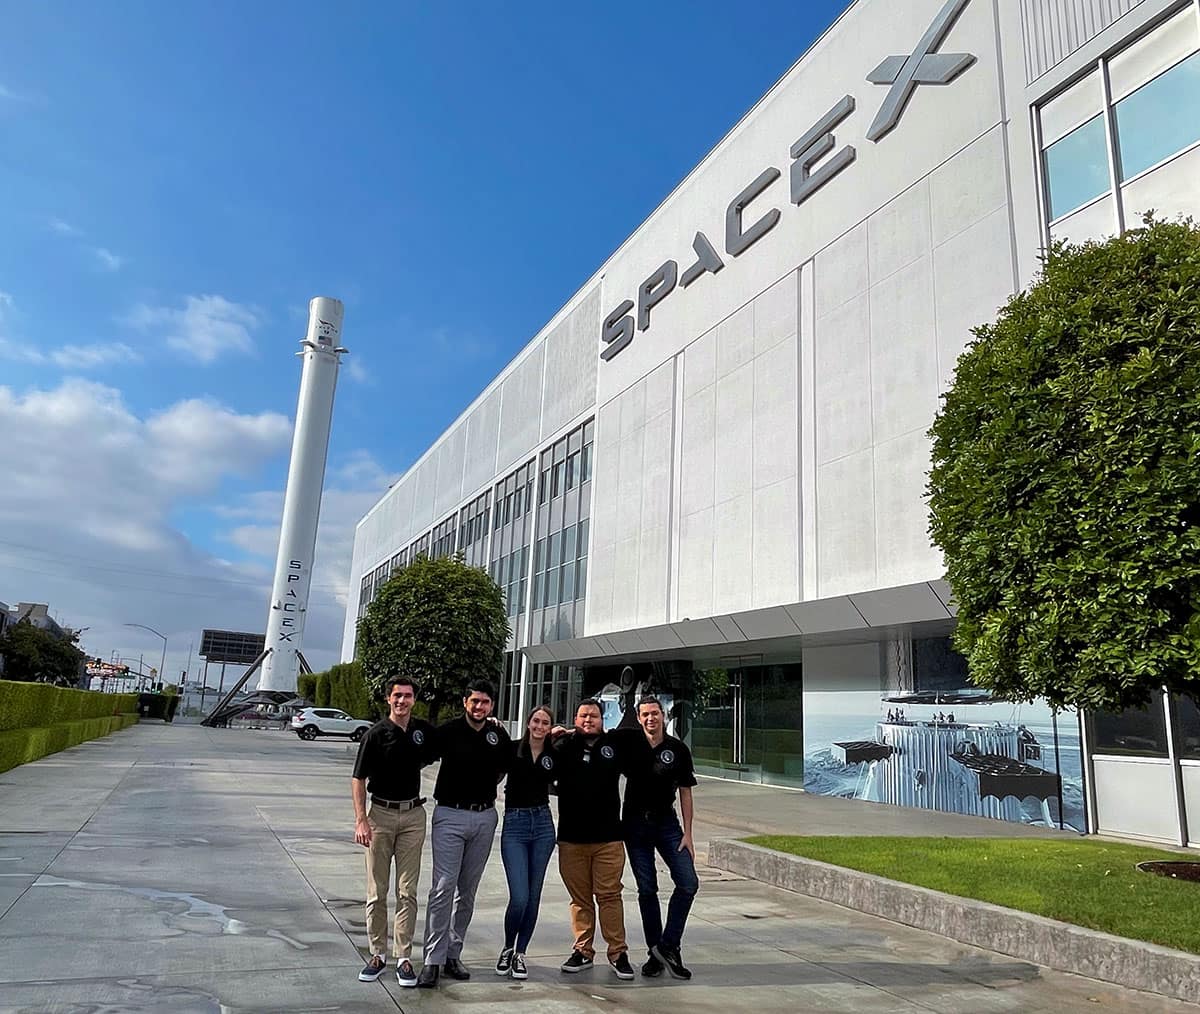 Embry-Riddle students (from left to right) Jarred Jordan, Joseph Nicolich, Taylor Yow, Daniel Posada and Daniel Lopez recently visited SpaceX Headquarters.